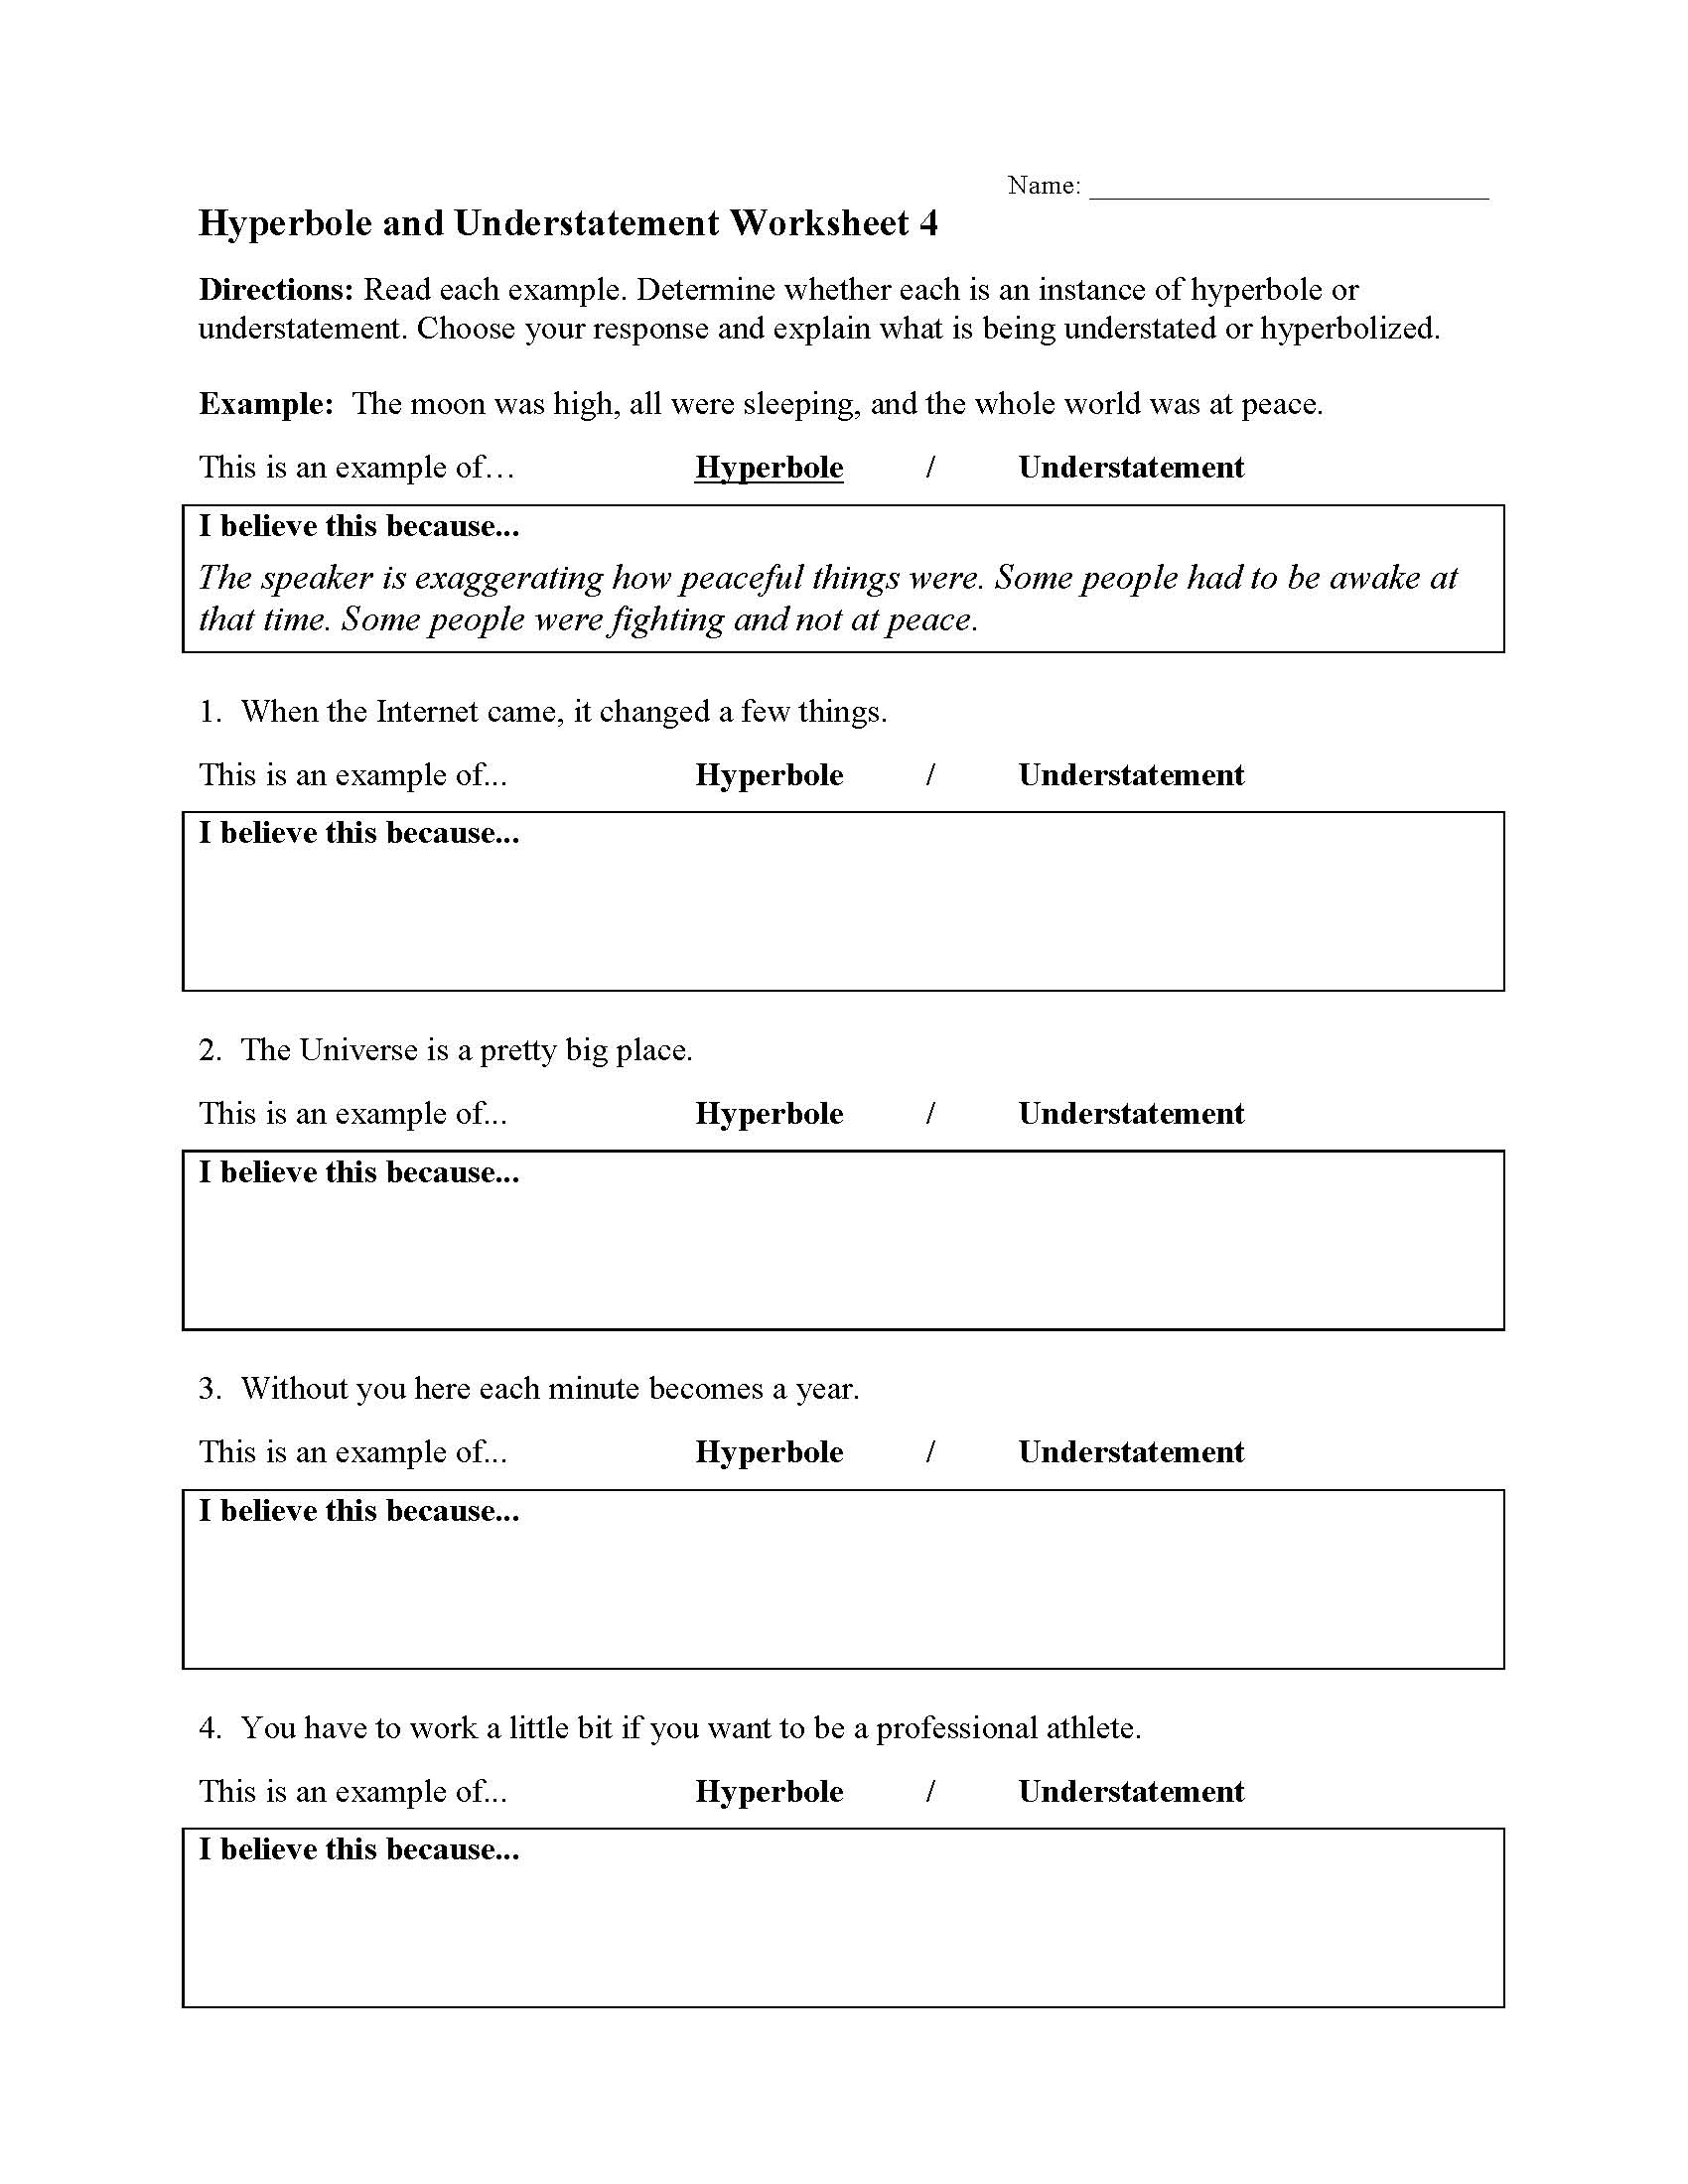 This is a preview image of Hyperbole and Understatement Worksheet 4. Click on it to enlarge it or view the source file.